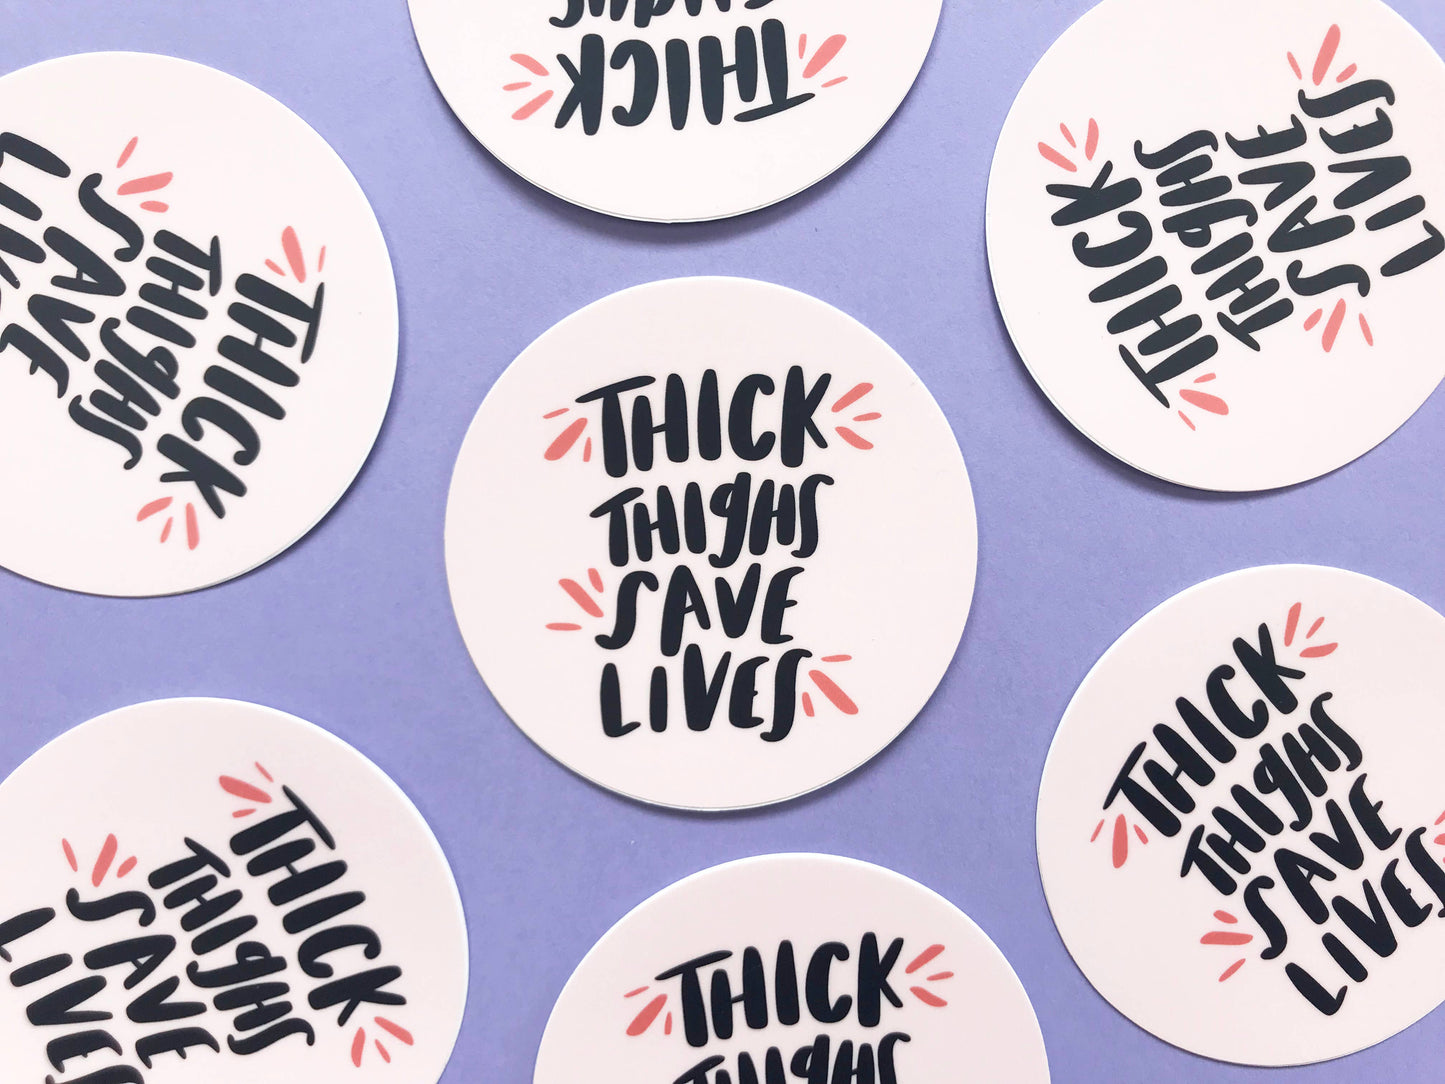 Thick thighs save lives sticker